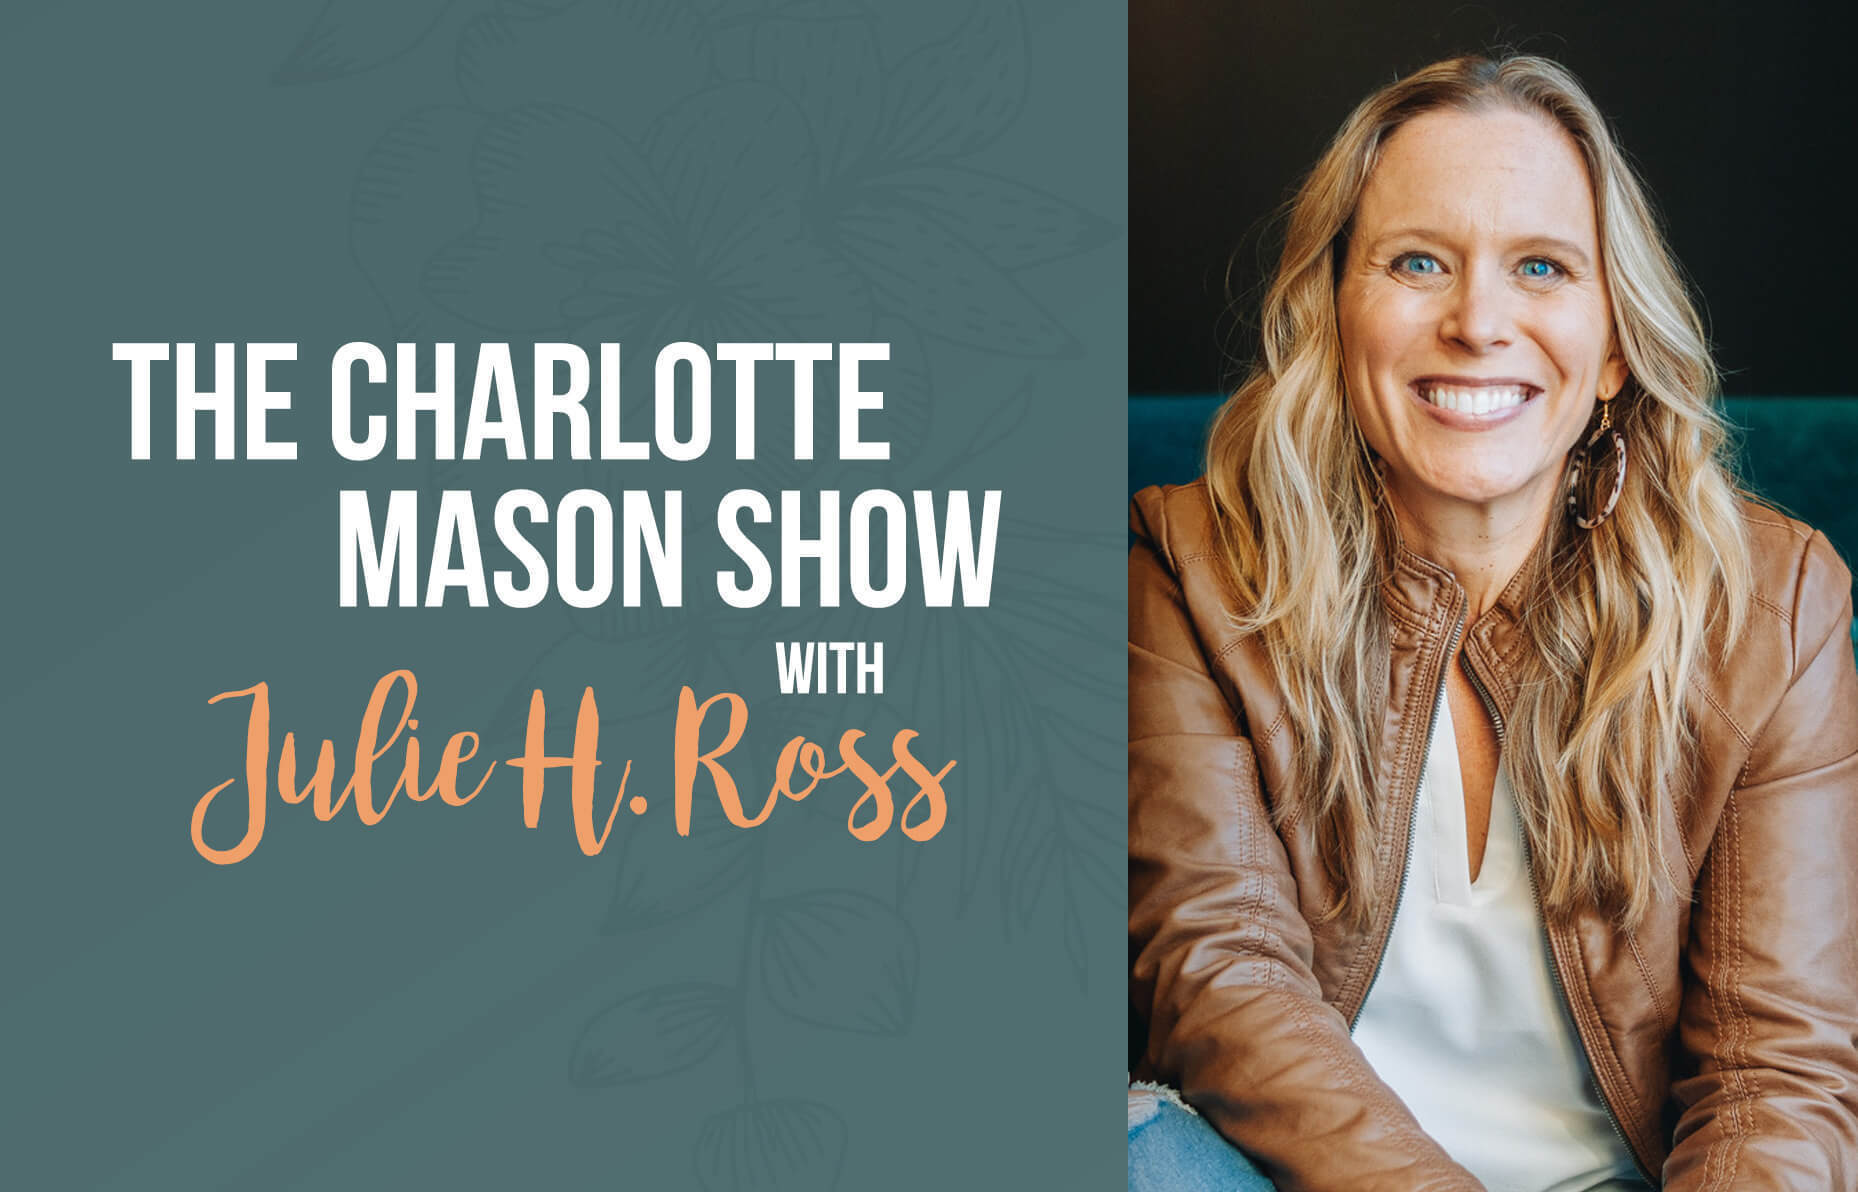 S4E22: Homeschooling and the Enneagram (with Christa Hardin)